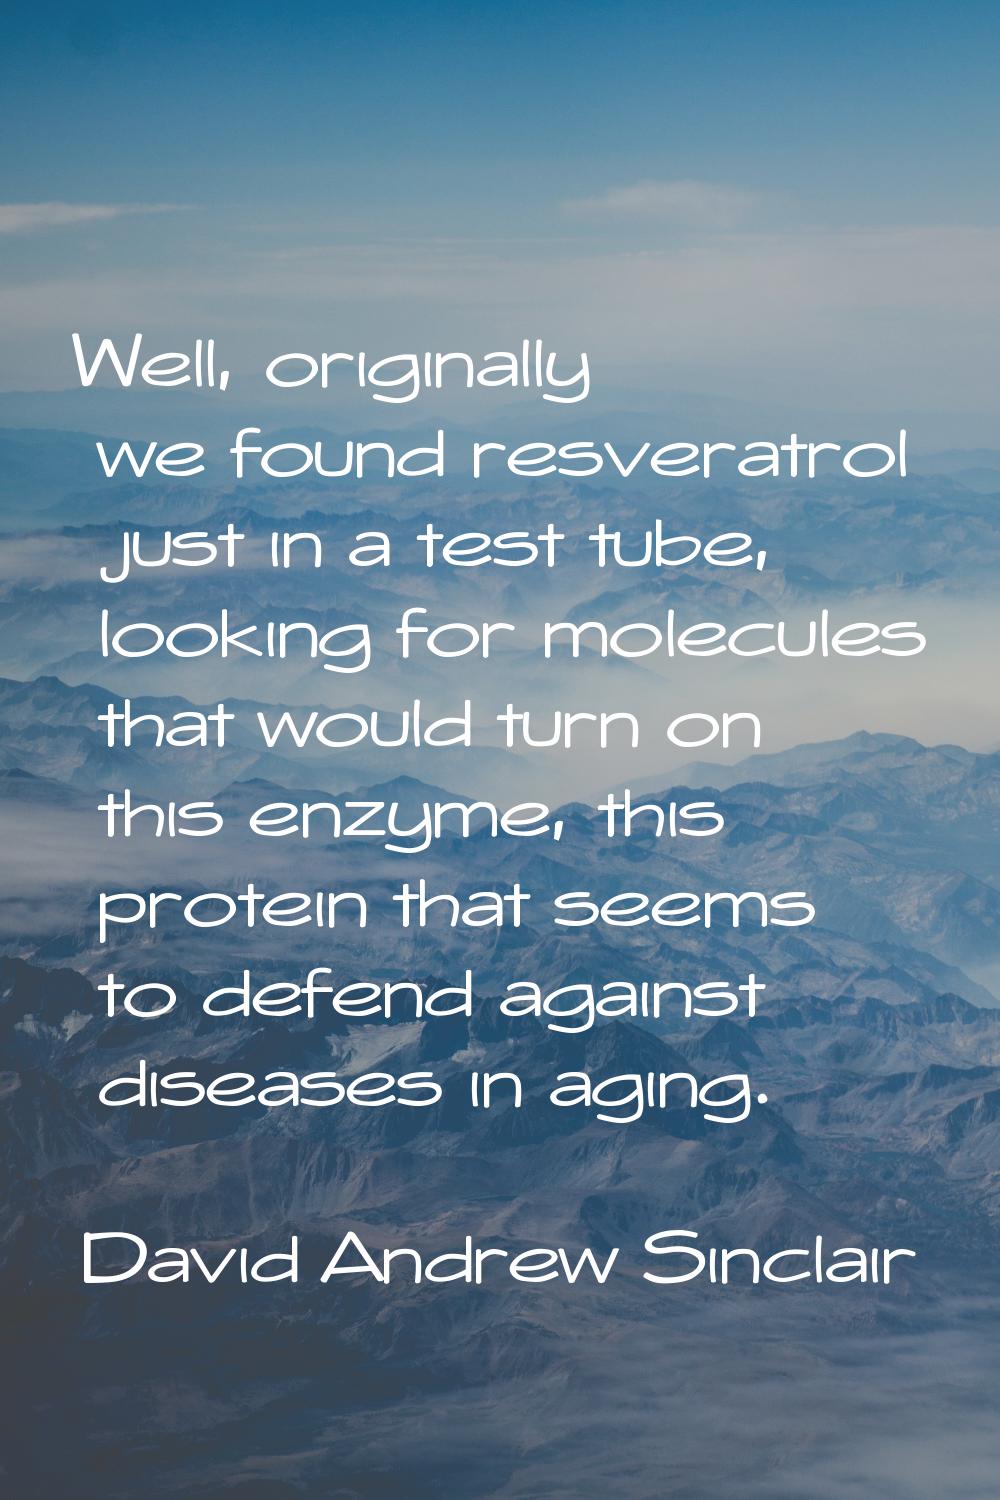 Well, originally we found resveratrol just in a test tube, looking for molecules that would turn on